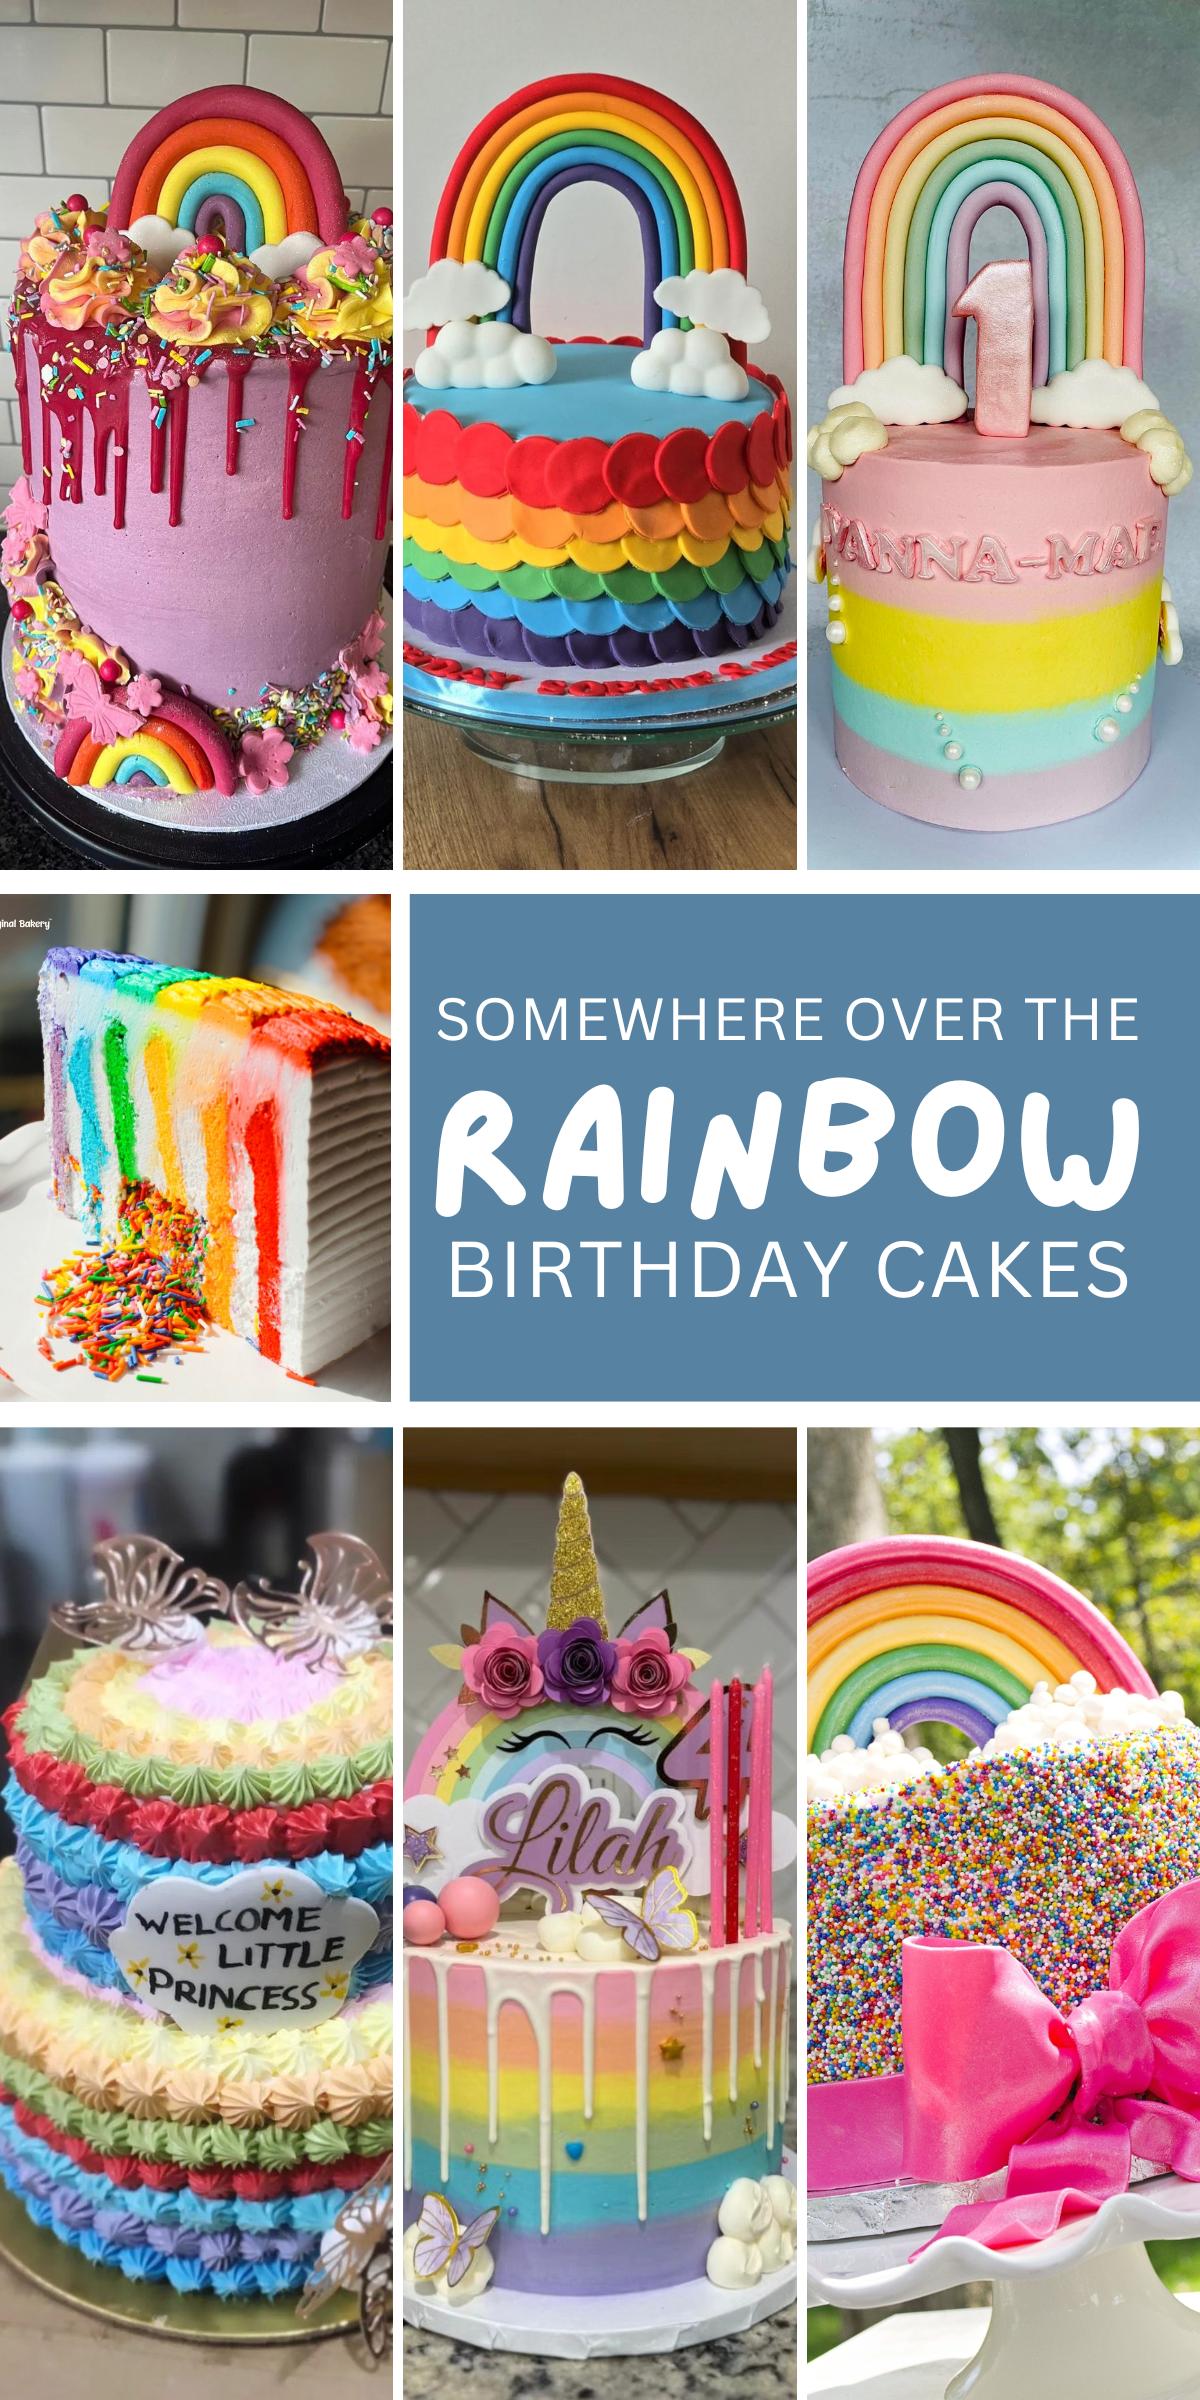 🎂🌈 Brighten up your birthday celebration with a stunning rainbow cake! 🌟 From classic layered cakes to surprise inside creations, our article is packed with colorful ideas to make your party unforgettable. Check out this vibrant rainbow birthday cake inspiration and get ready to spread some joy! 🎉🍰✨